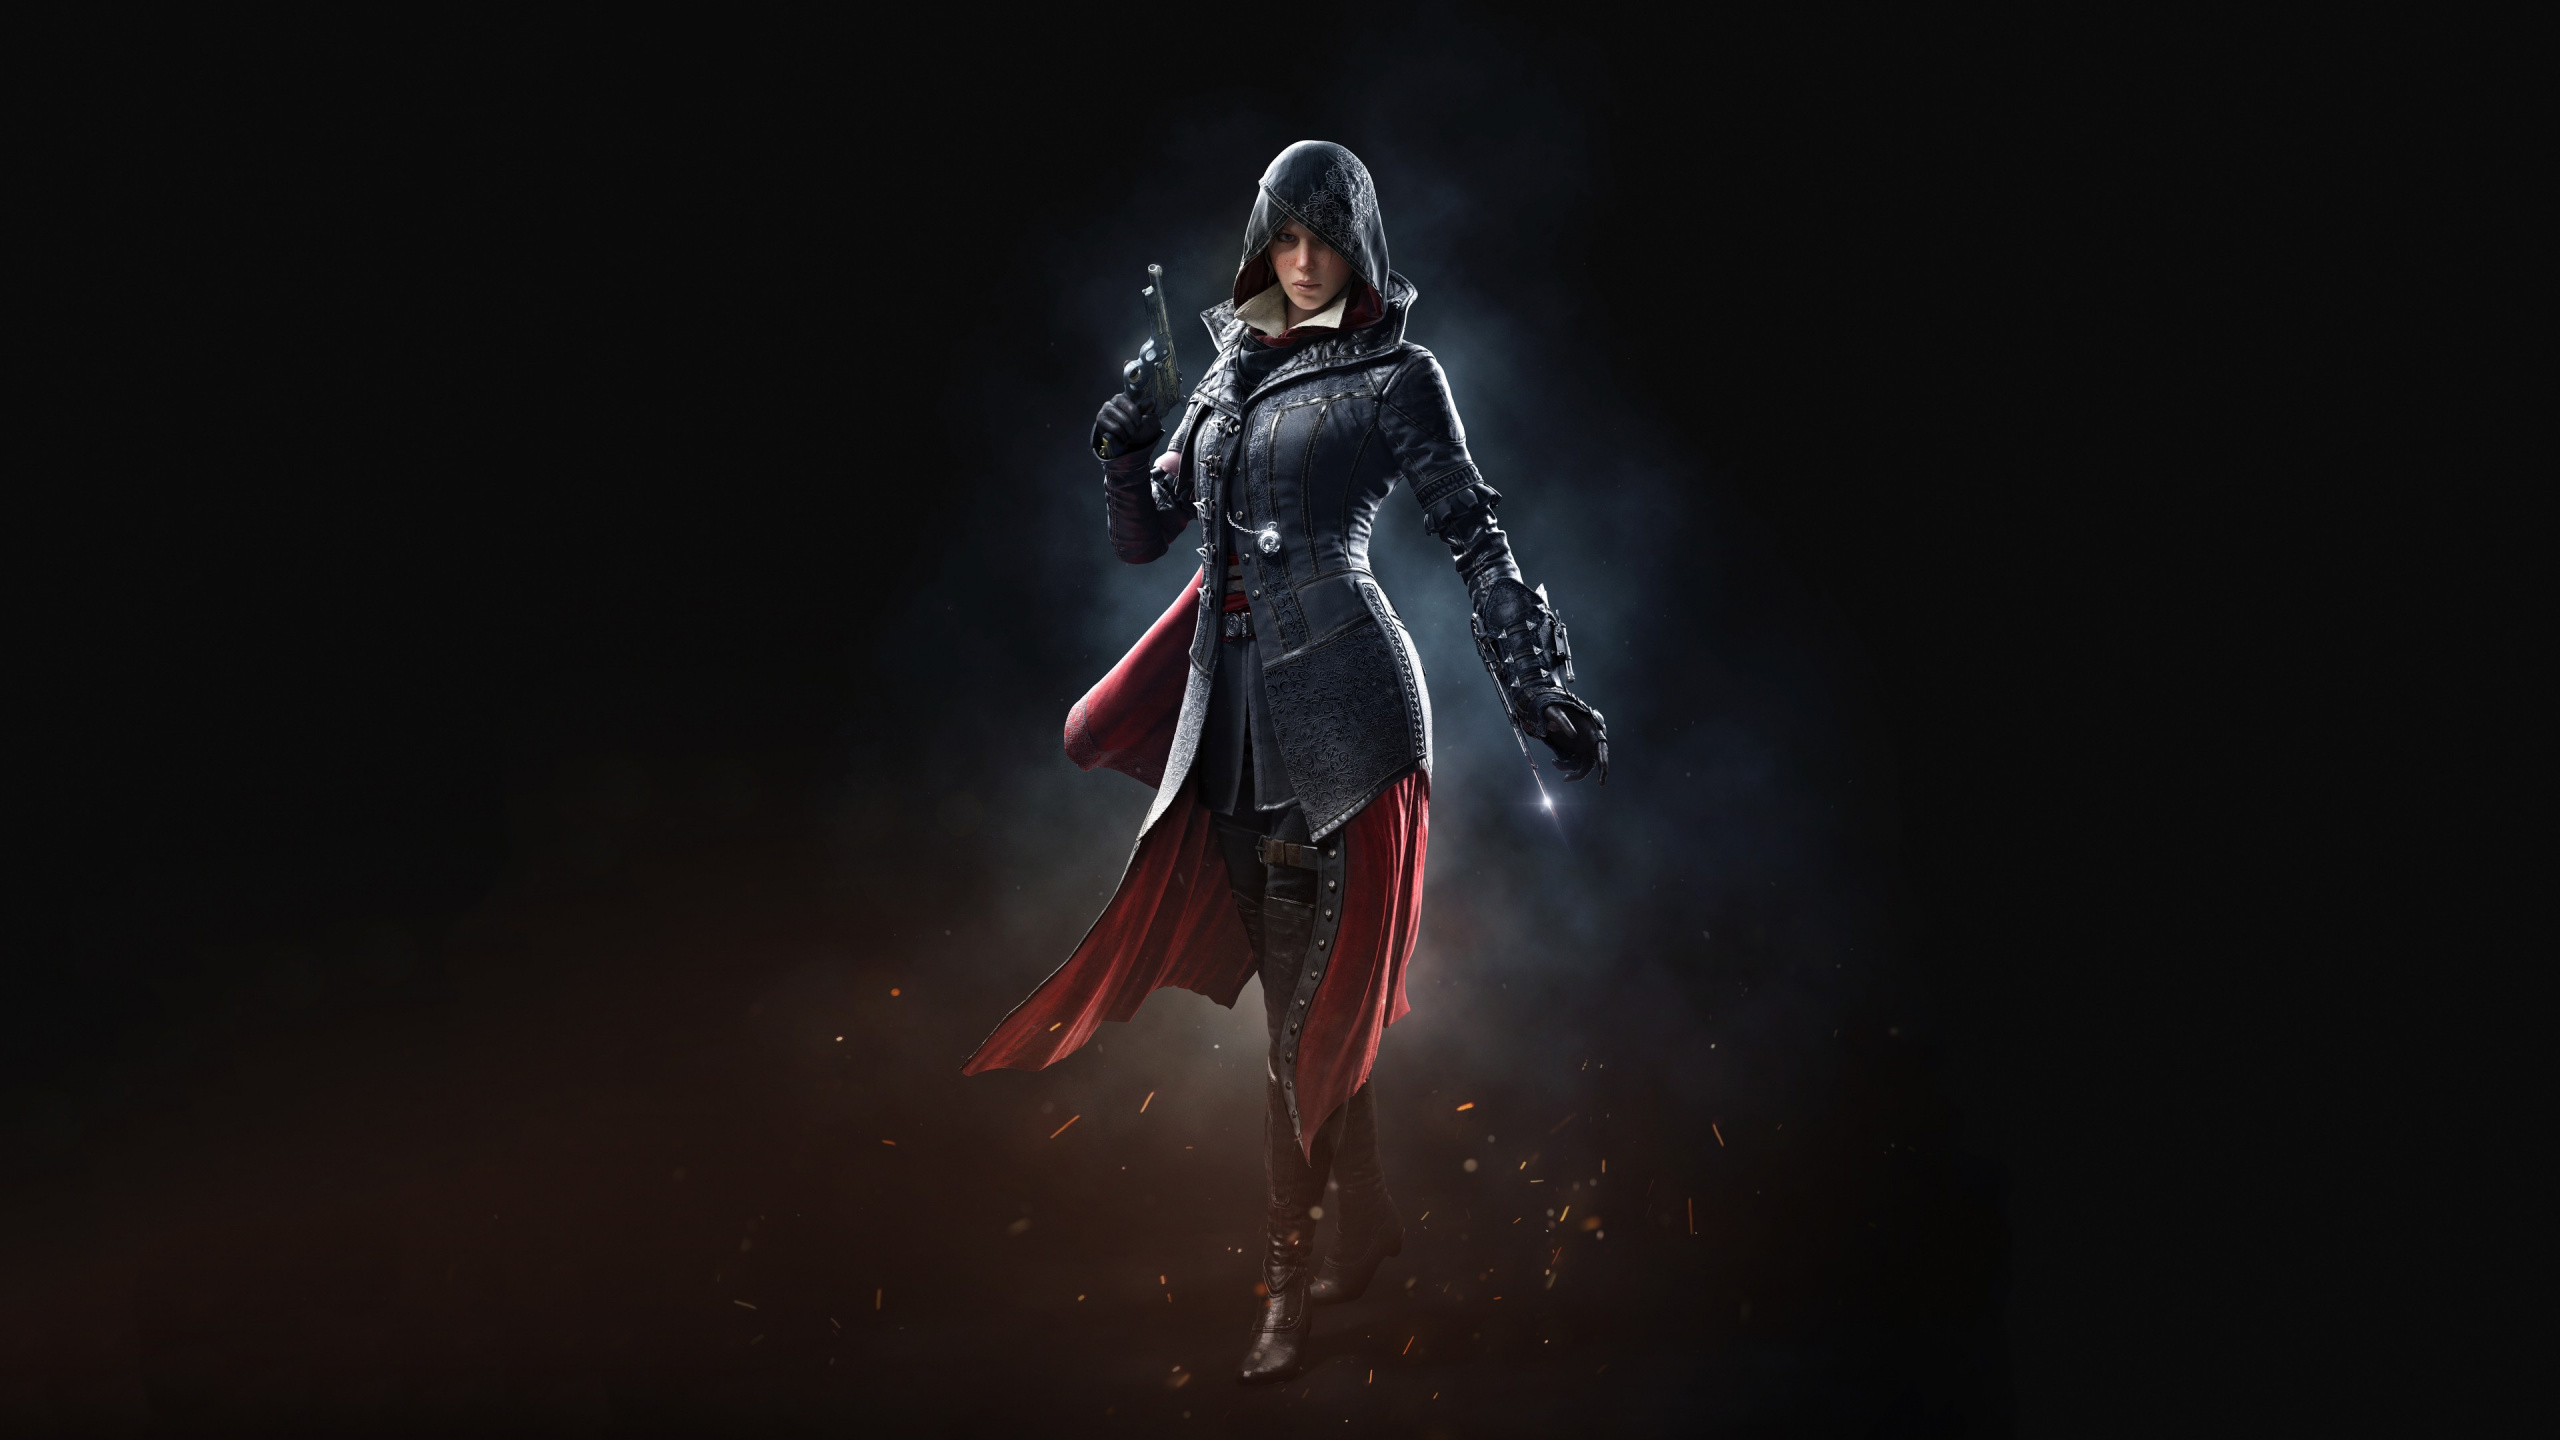 Assassins Creed Syndicat, Assassins Creed, Obscurité, Superhero, Figurine. Wallpaper in 2560x1440 Resolution